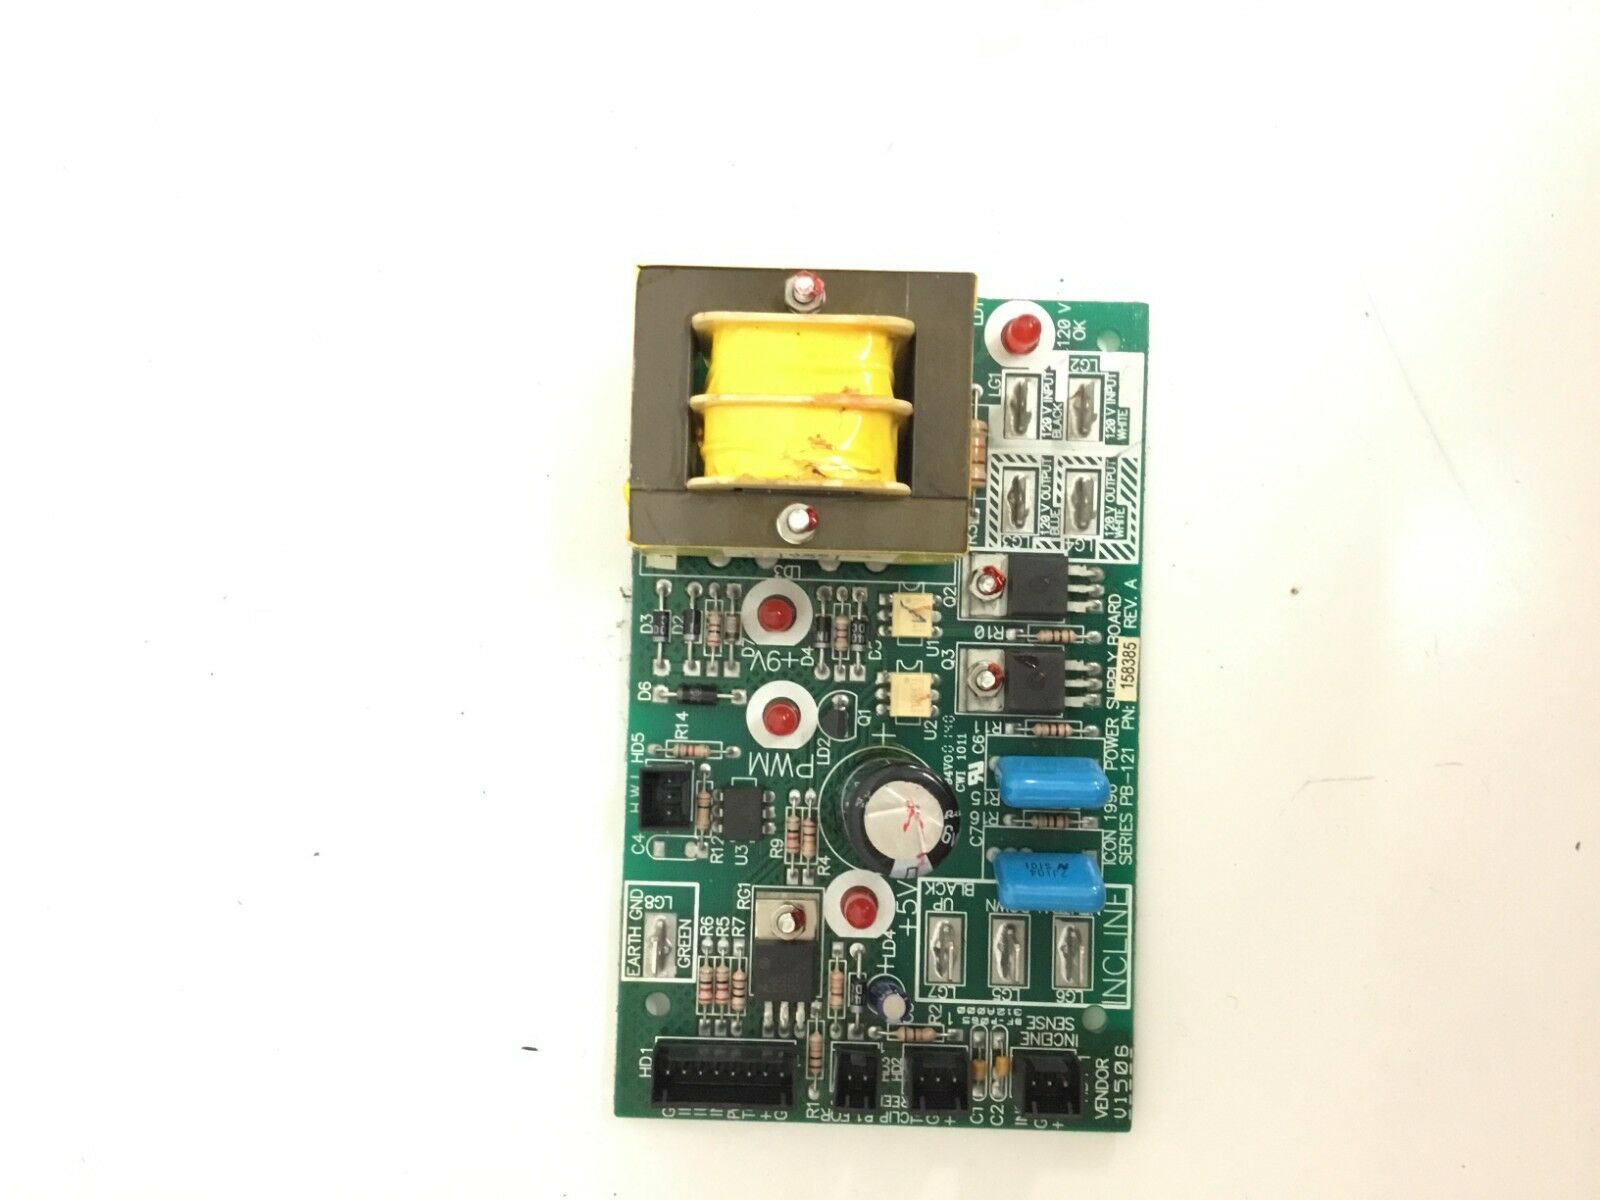 Power Supply Board (Used)